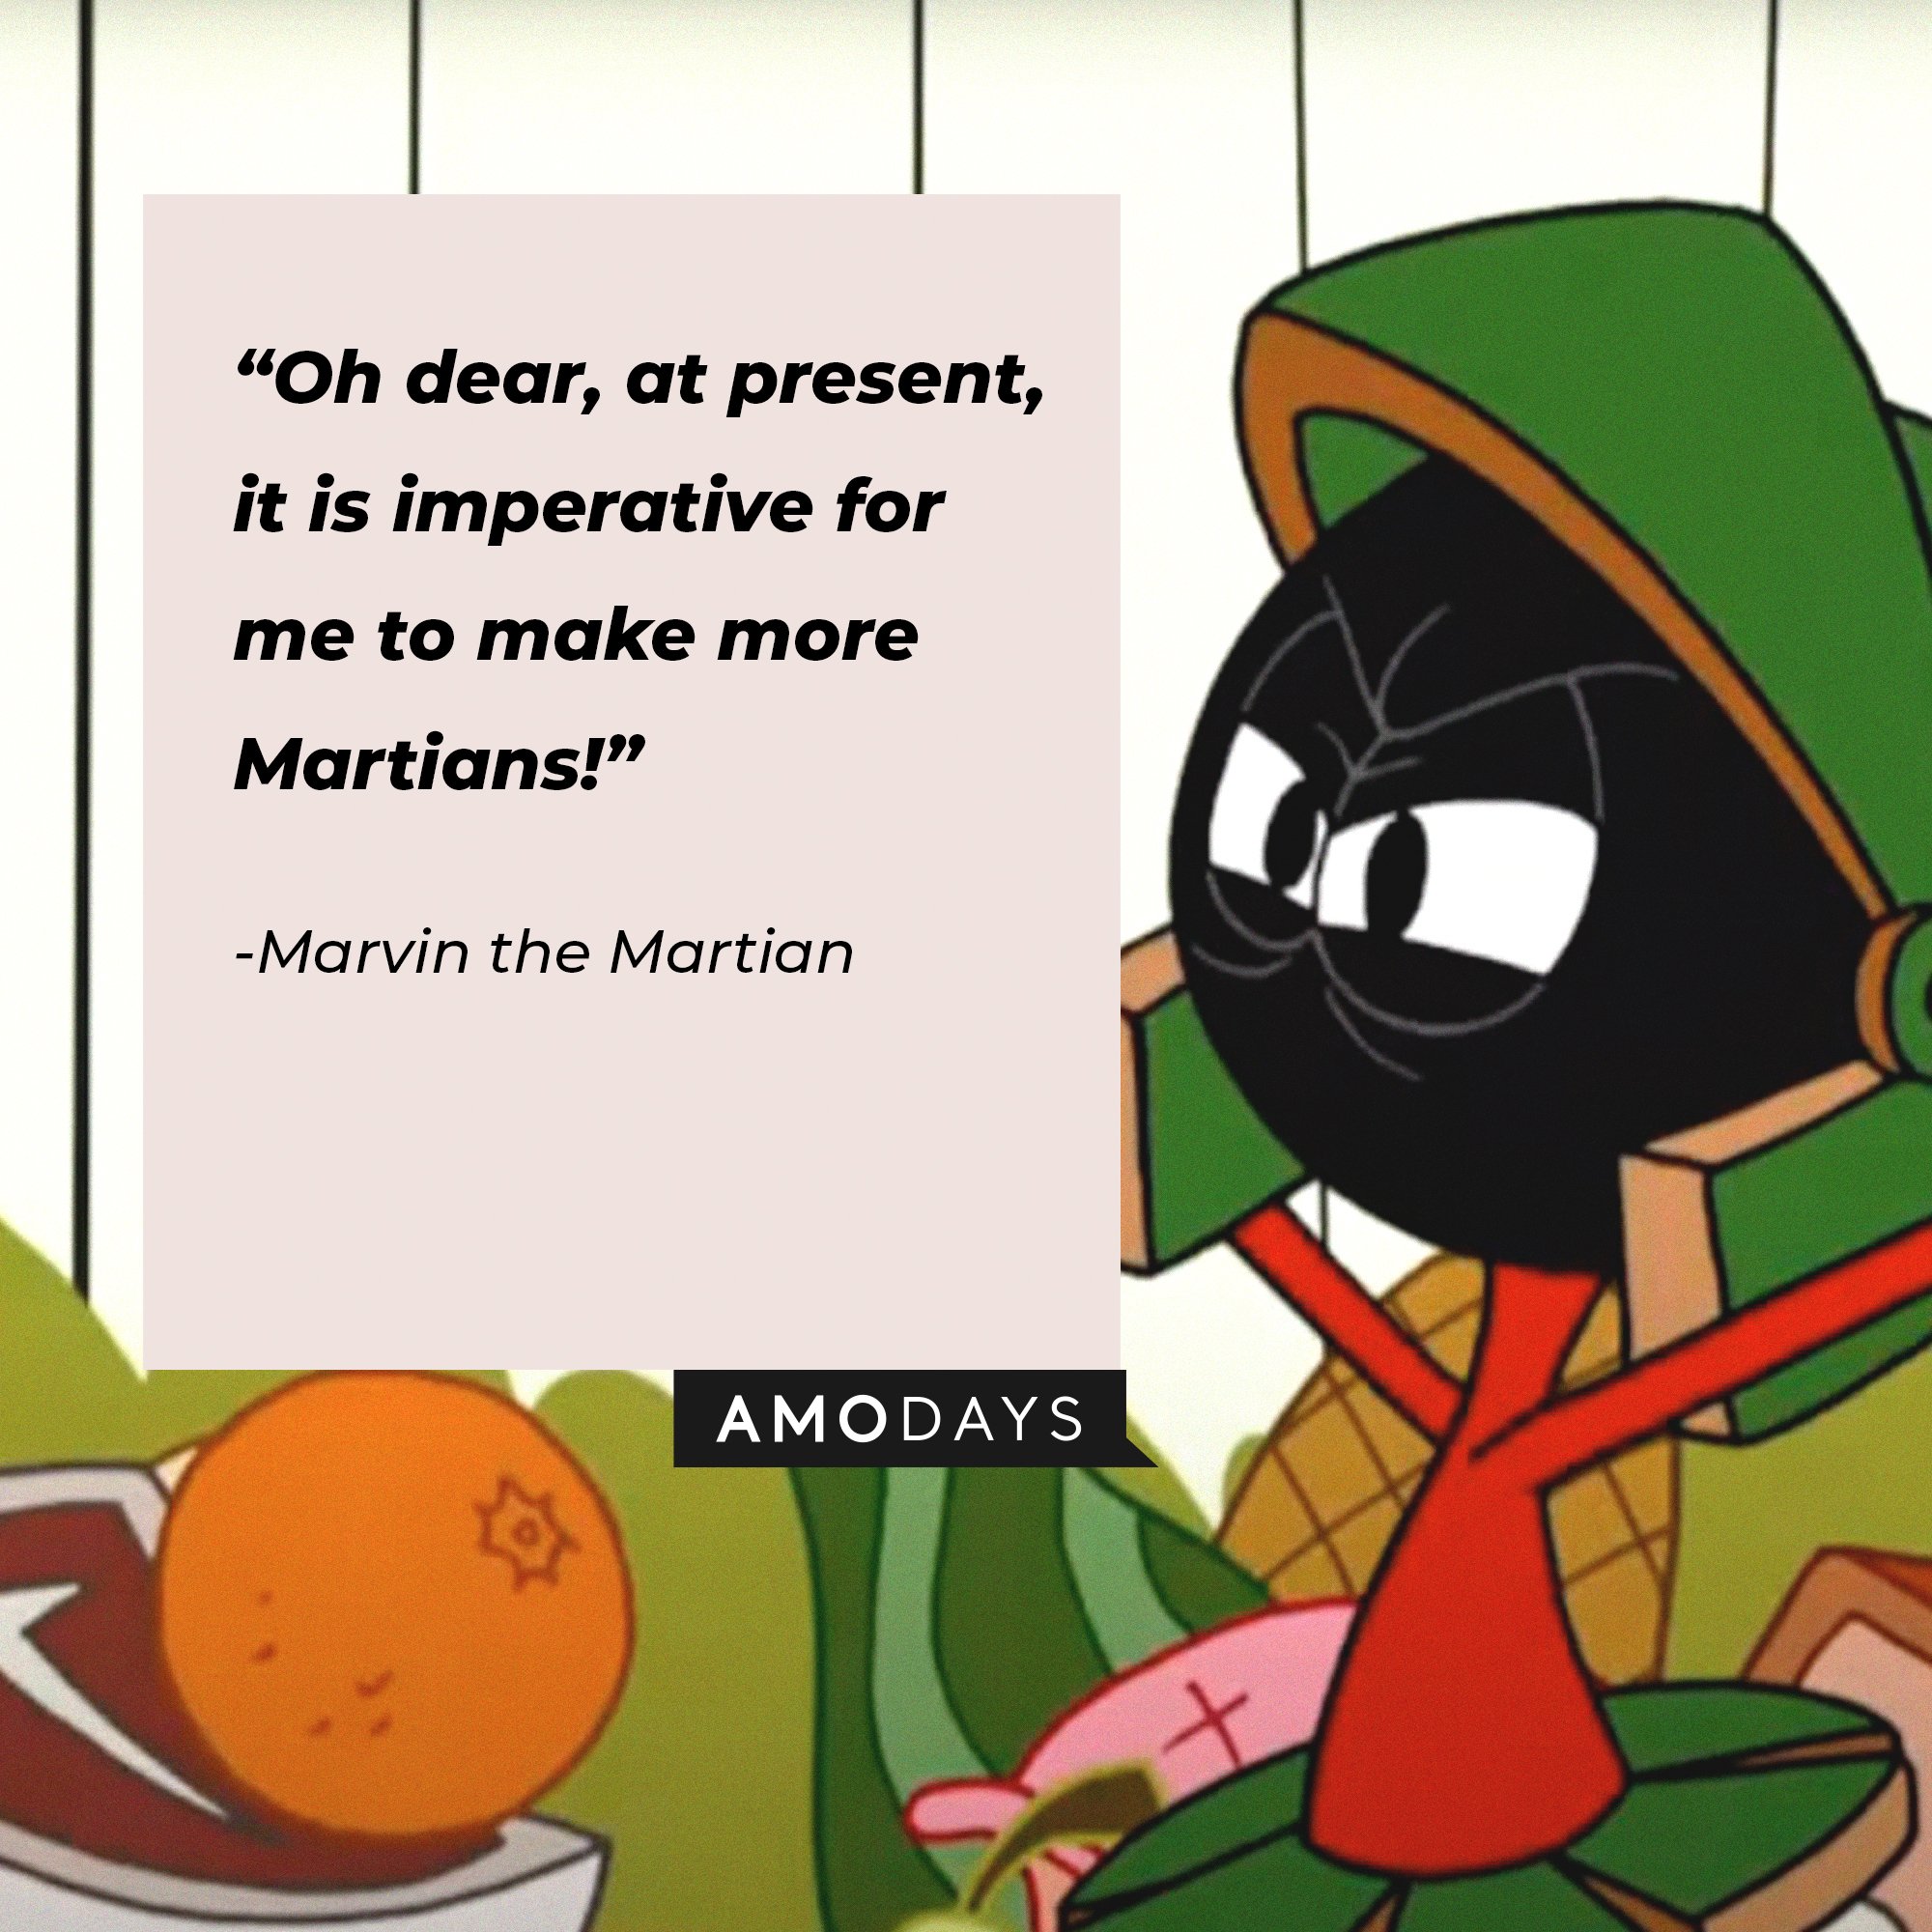  Marvin the Martian’s quote: “Oh dear, at present, it is imperative for me to make more Martians!" | Image: AmoDays